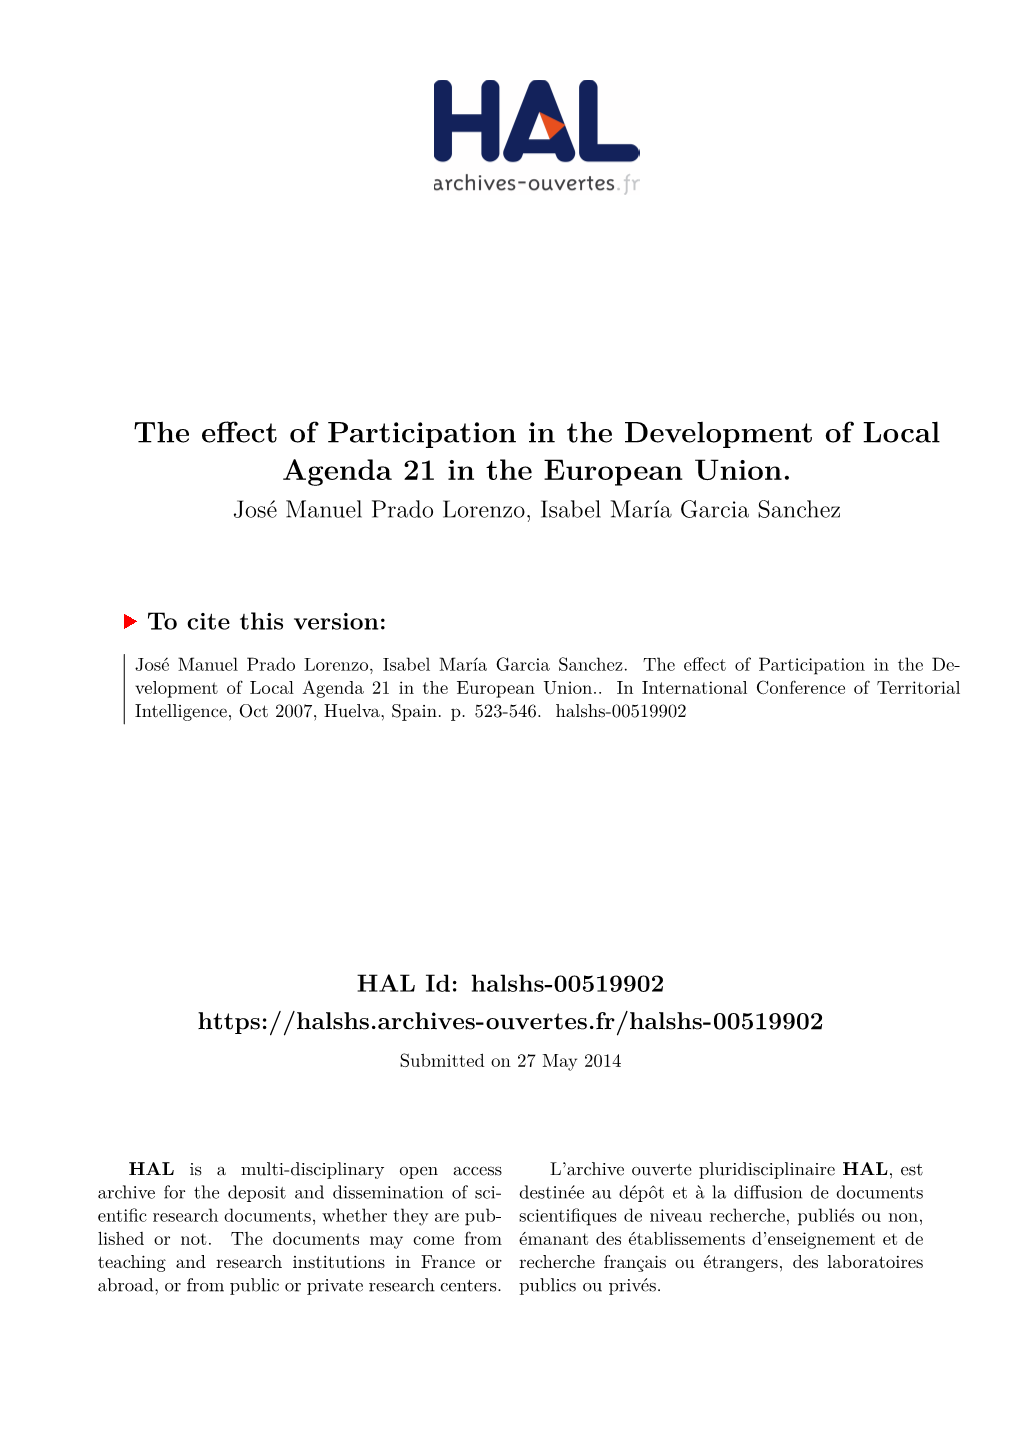 The Effect of Participation in the Development of Local Agenda 21 in the European Union